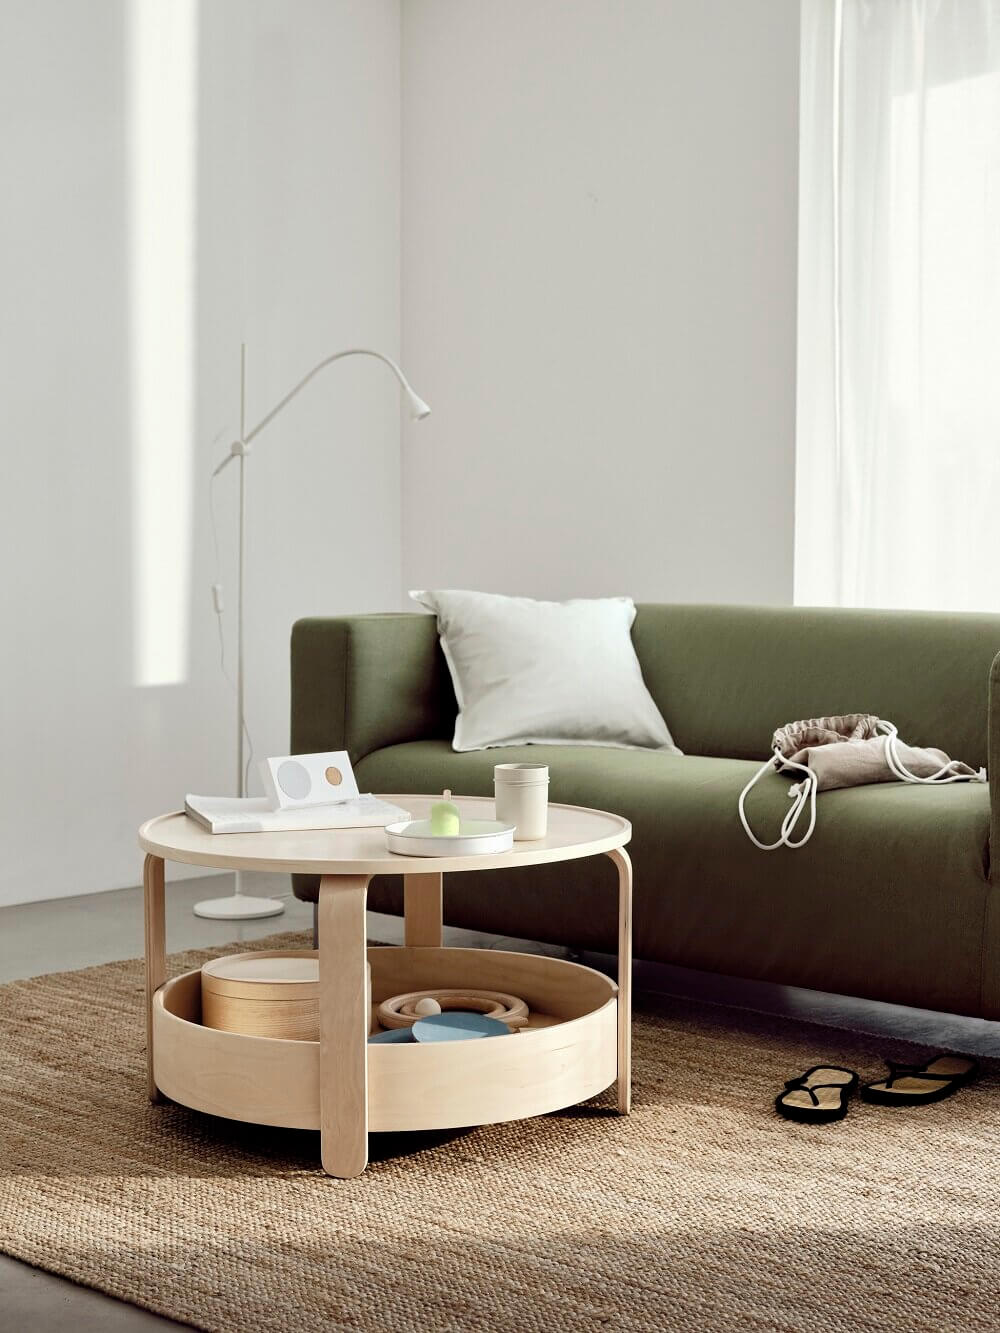 NatureIsCallingInIKEAsSpringCollection2021 BORGEBYcoffeetable TheNordroom Nature Is Calling In IKEA's Spring Collection 2021